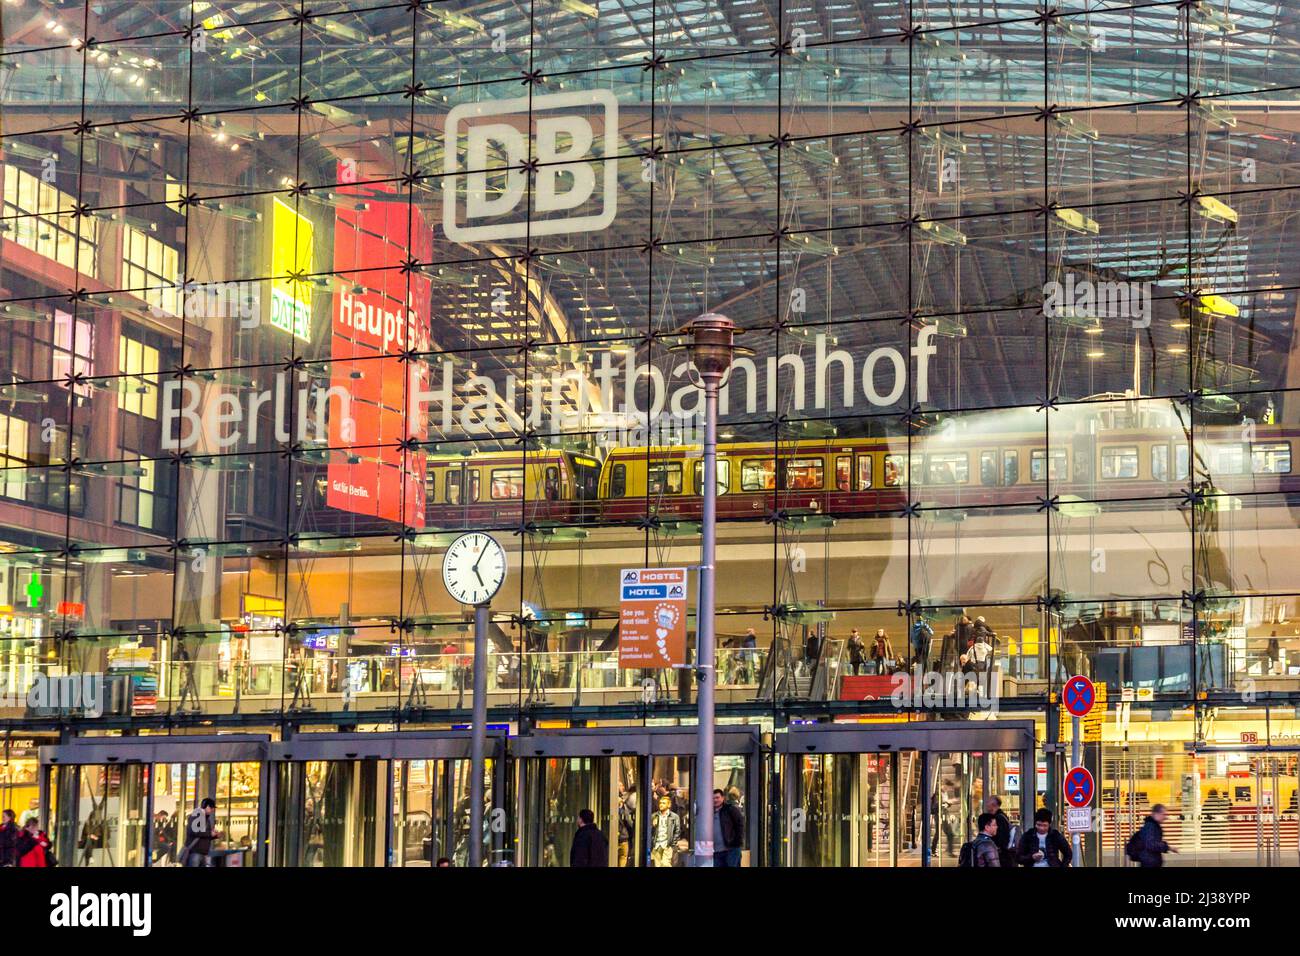 BERLIN, GERMANY - OCT 27, 2014: Berlin main station frontview by night in Berlin, Germany. This railway station came into full operation after a cerem Stock Photo